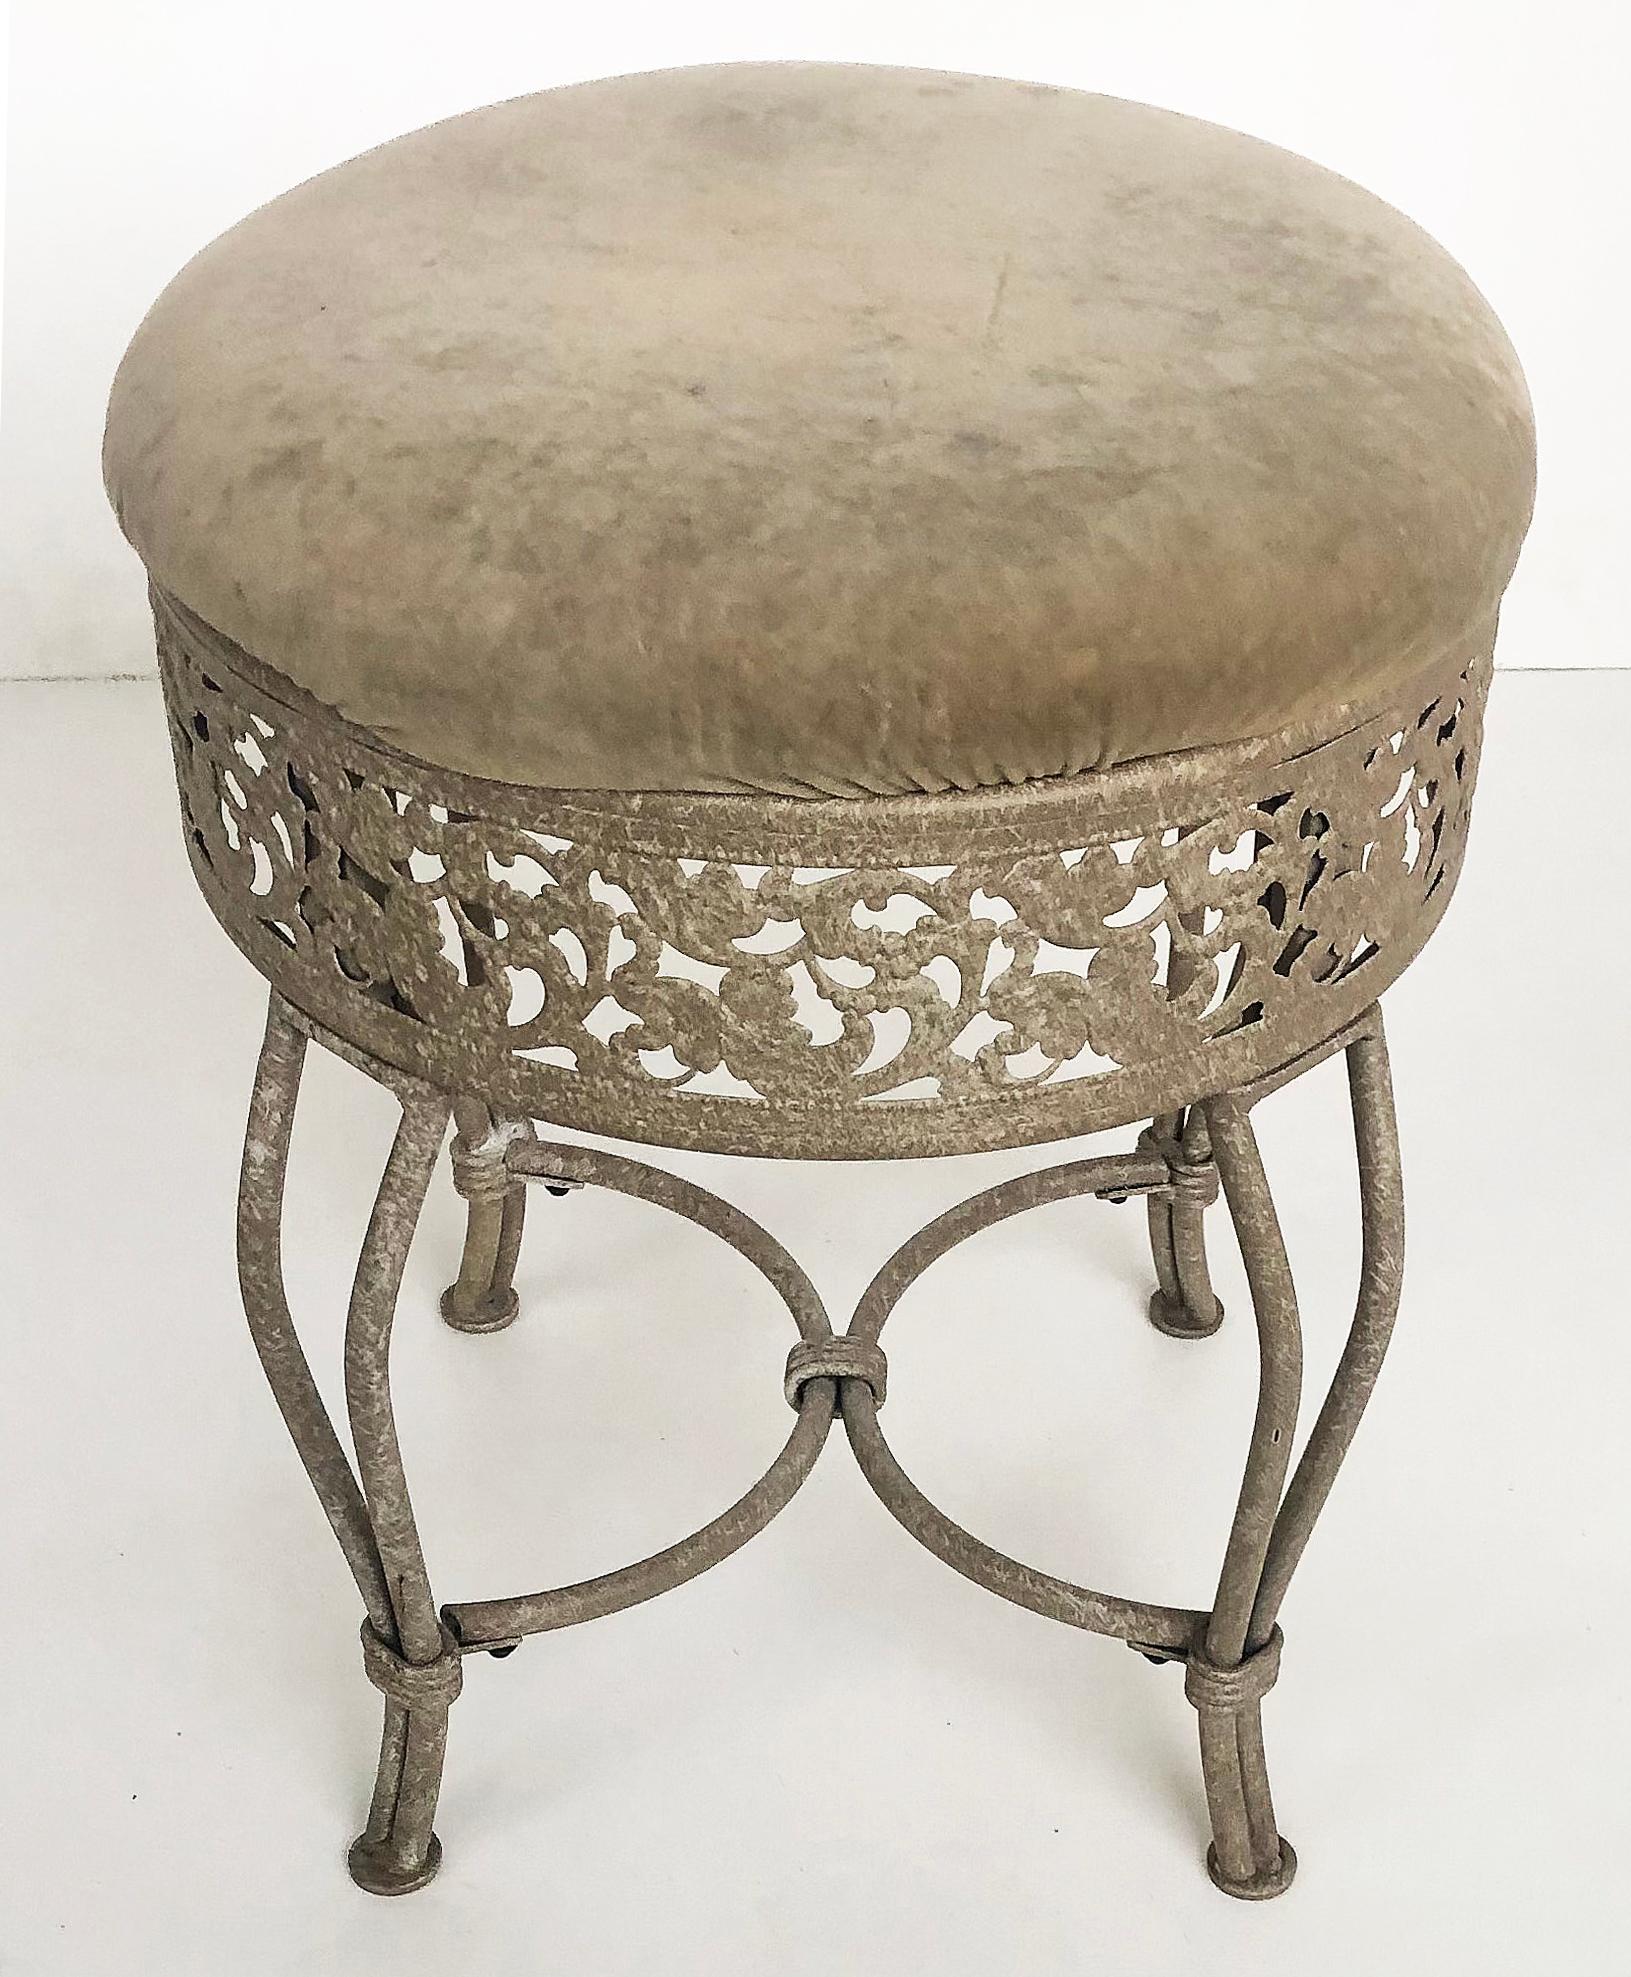 Pierced Wrought Iron Painted Upholstered Bar Stool, As Found Upholstery

Offered for sale is a vintage pierced painted wrought Iron low stool with an as-found vintage seat that will require reupholstering.